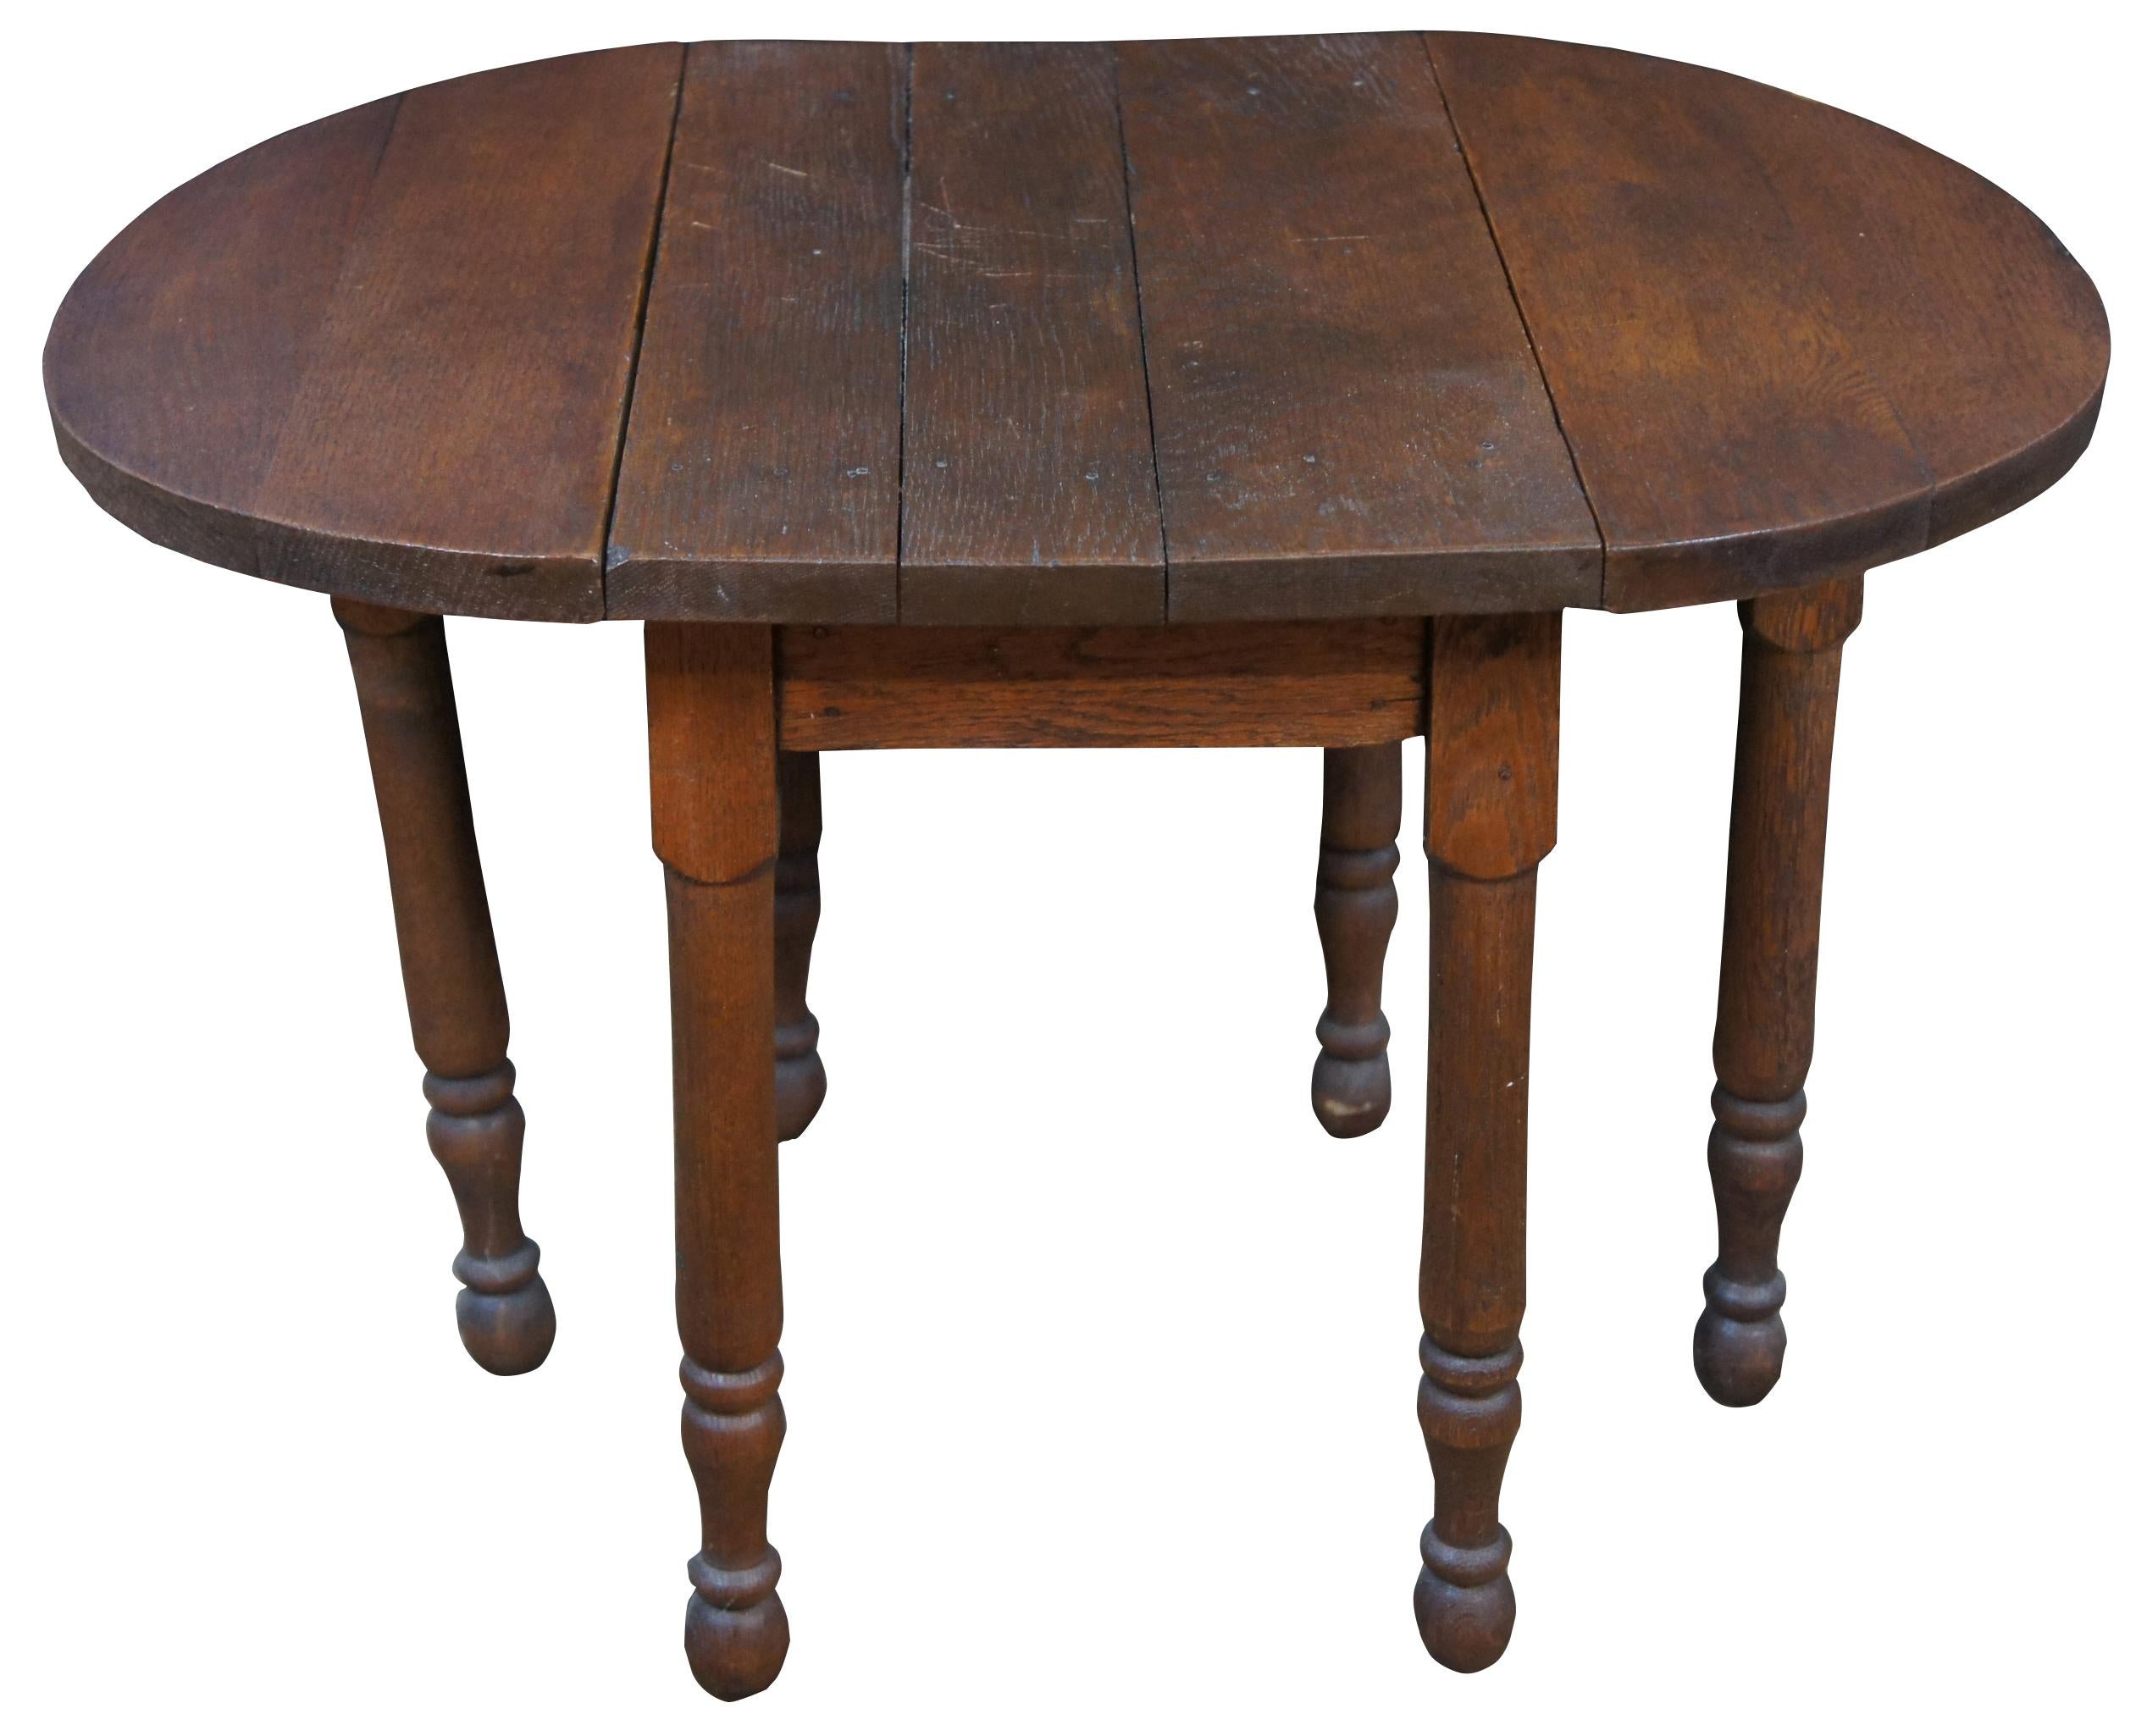 Early 20th century antique Victorian miniature salesman sample drop-leaf gateleg dining table. Features a plank top with oval gateleg extensions. Measures: 18